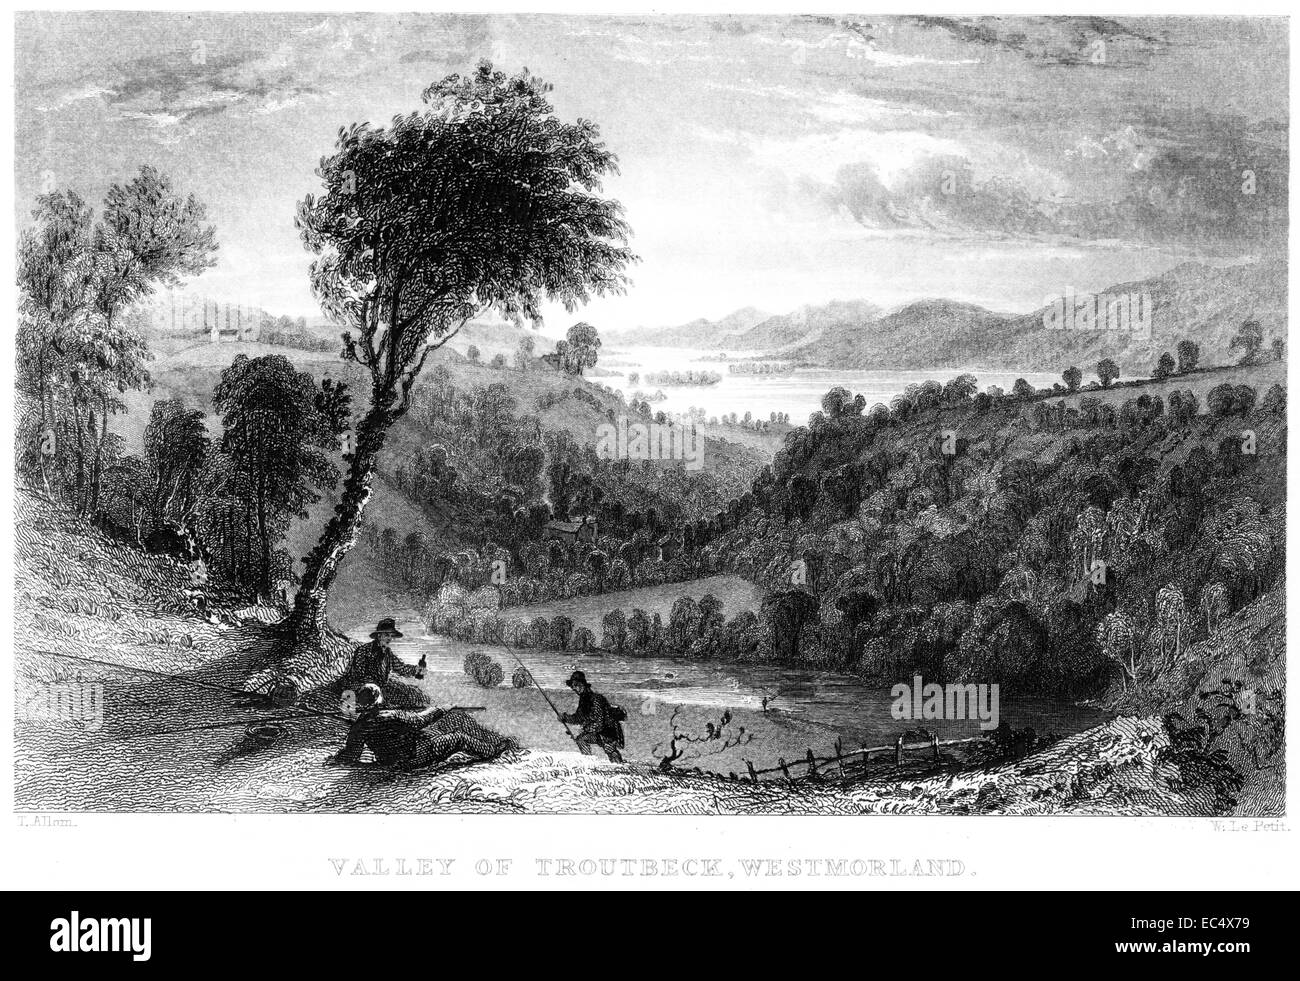 An engraving entitled 'Vale of Troutbeck, Westmorland' scanned at high resolution from a book published in 1834.  Believed copyright free. Stock Photo